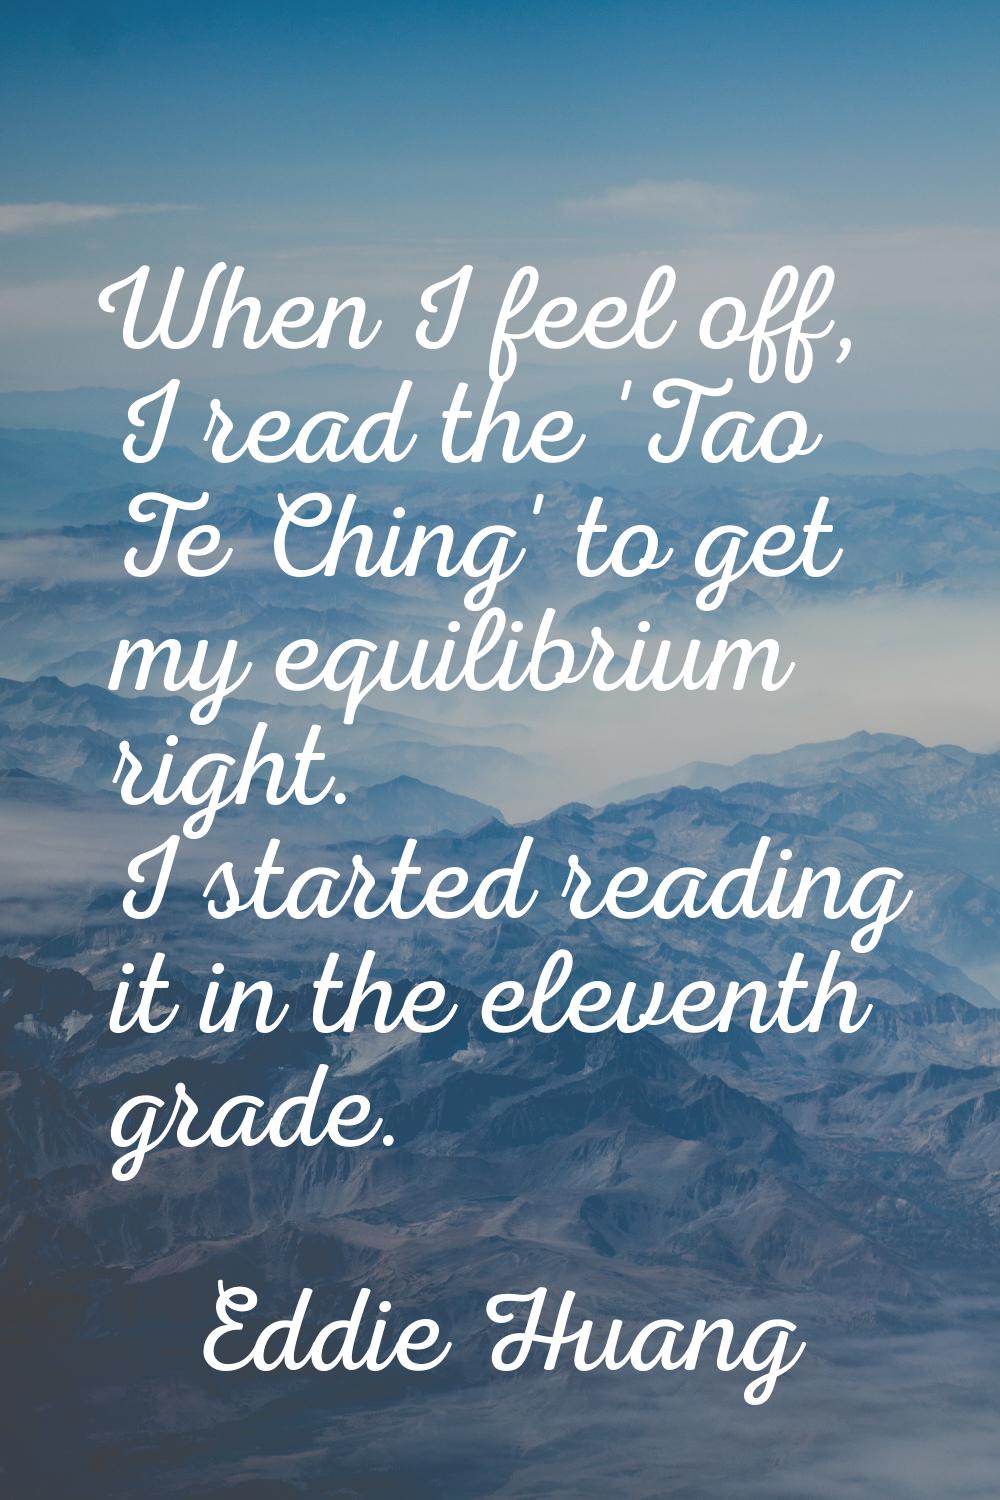 When I feel off, I read the 'Tao Te Ching' to get my equilibrium right. I started reading it in the